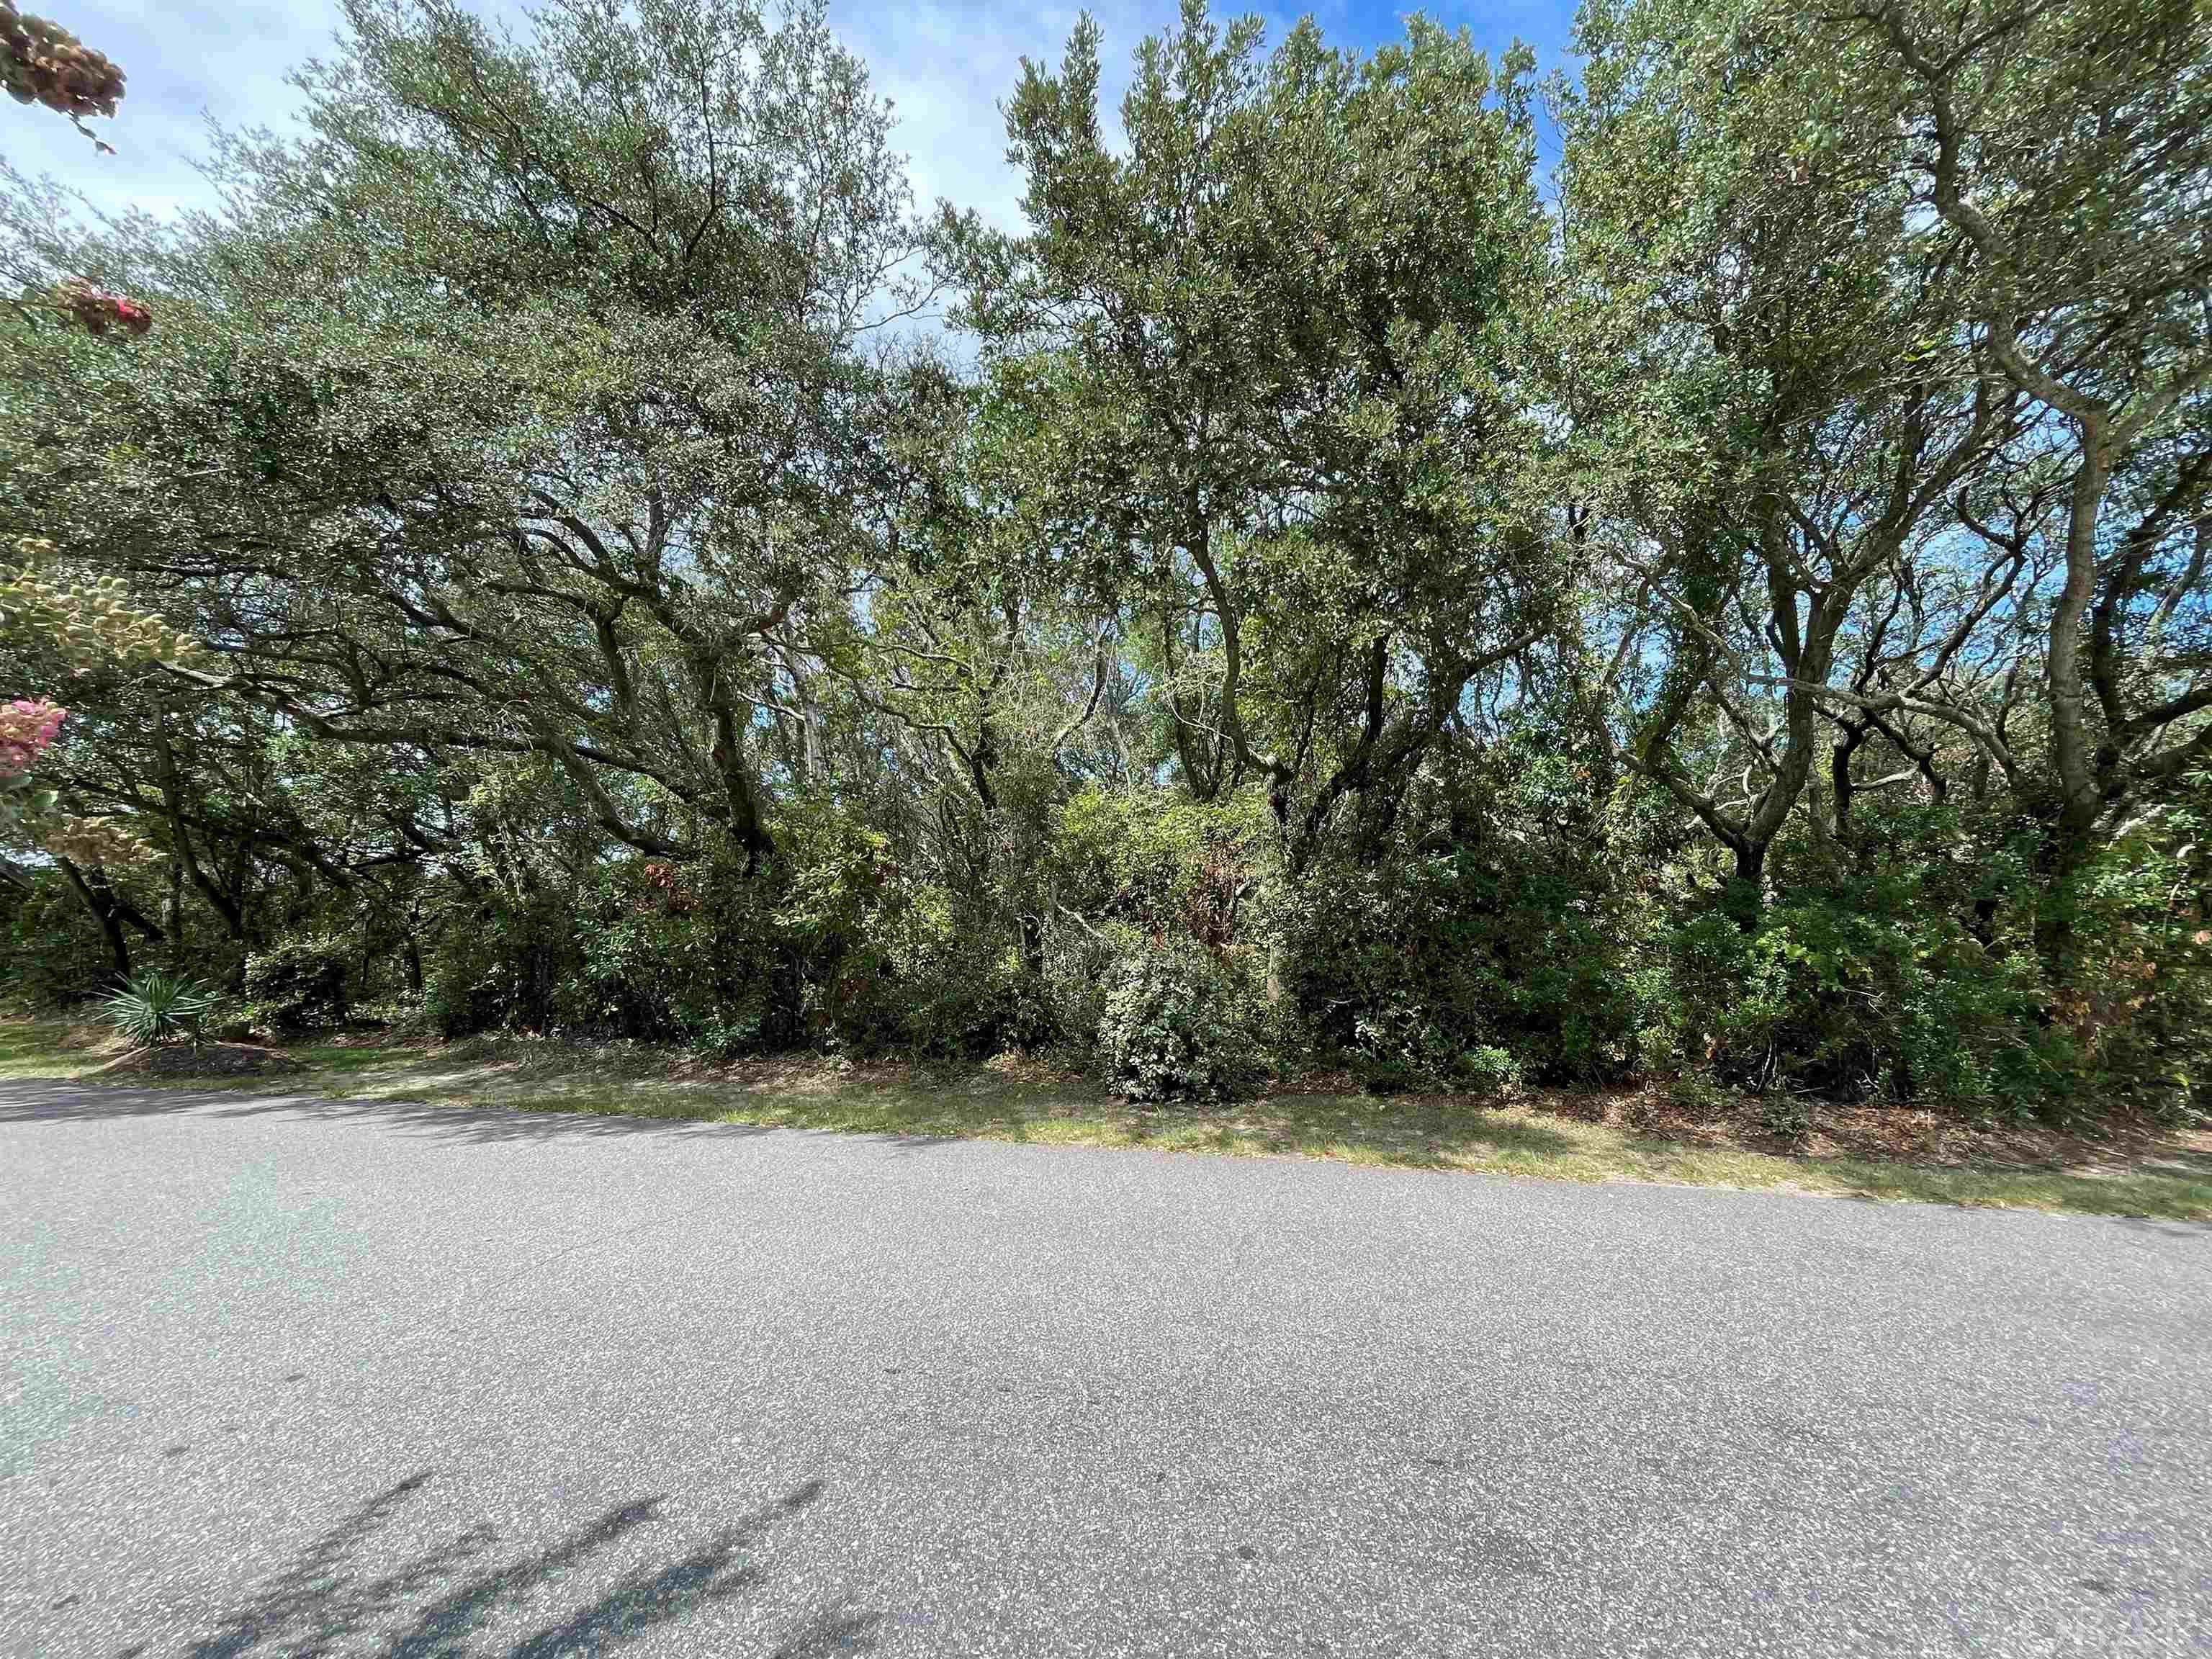 Gorgeous live oaks abound on this beautiful oceanside lot located in Caffey's Inlet Hamlet.  This is a corner lot with more than 16,000 sq. ft and located directly across the street from the Currituck Sound.  A home built on this property would have an unobstructed view of the sound as it overlooks the private soundside access and park area for the subdivision.  This is an ideal spot to enjoy the famous sunsets or maybe take out your canoe or kayak.  Caffey's Inlet Hamlet has a quaint neighborhood feel with tree lined streets and private ocean and sound access.  Close enough to the village of Duck yet away from it all!  The oceanside bike path allows easy access to all the amenities that Duck has to offer!